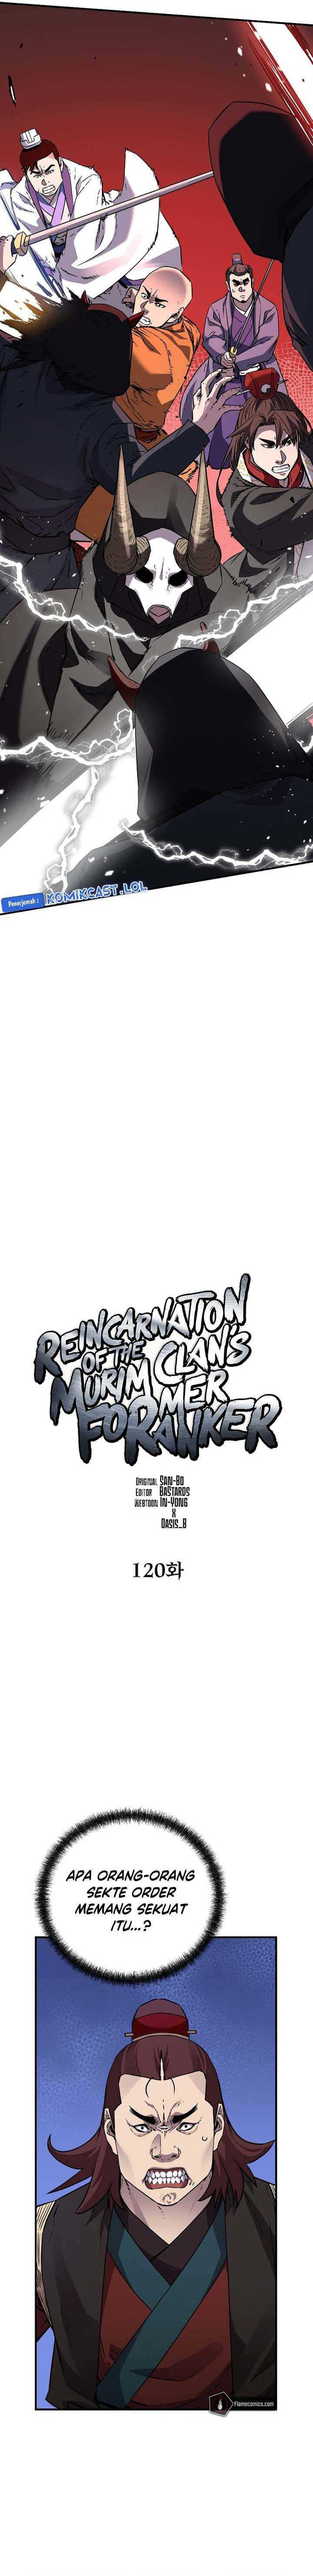 Reincarnation of the Murim Clan’s Former Ranker Chapter 120